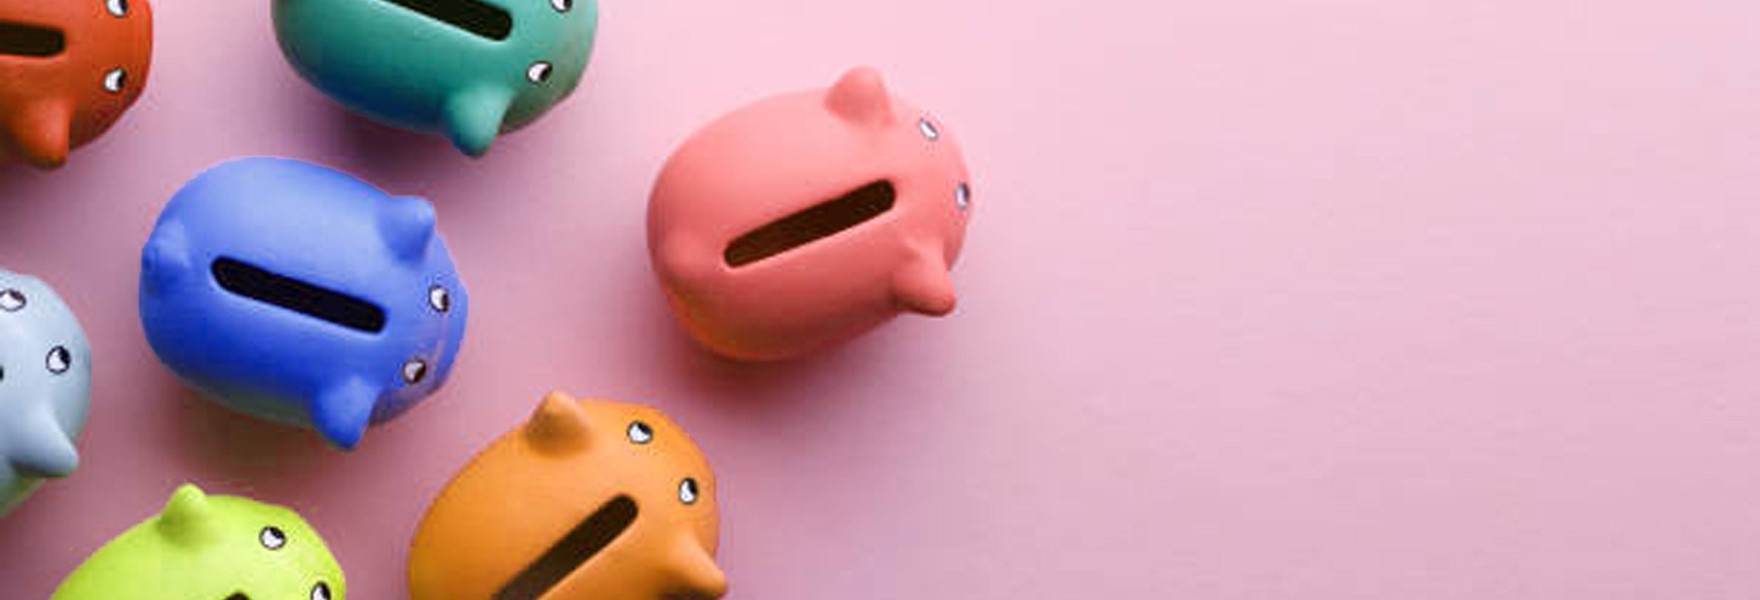 Colorful Piggy Banks Picture Id1169479391 